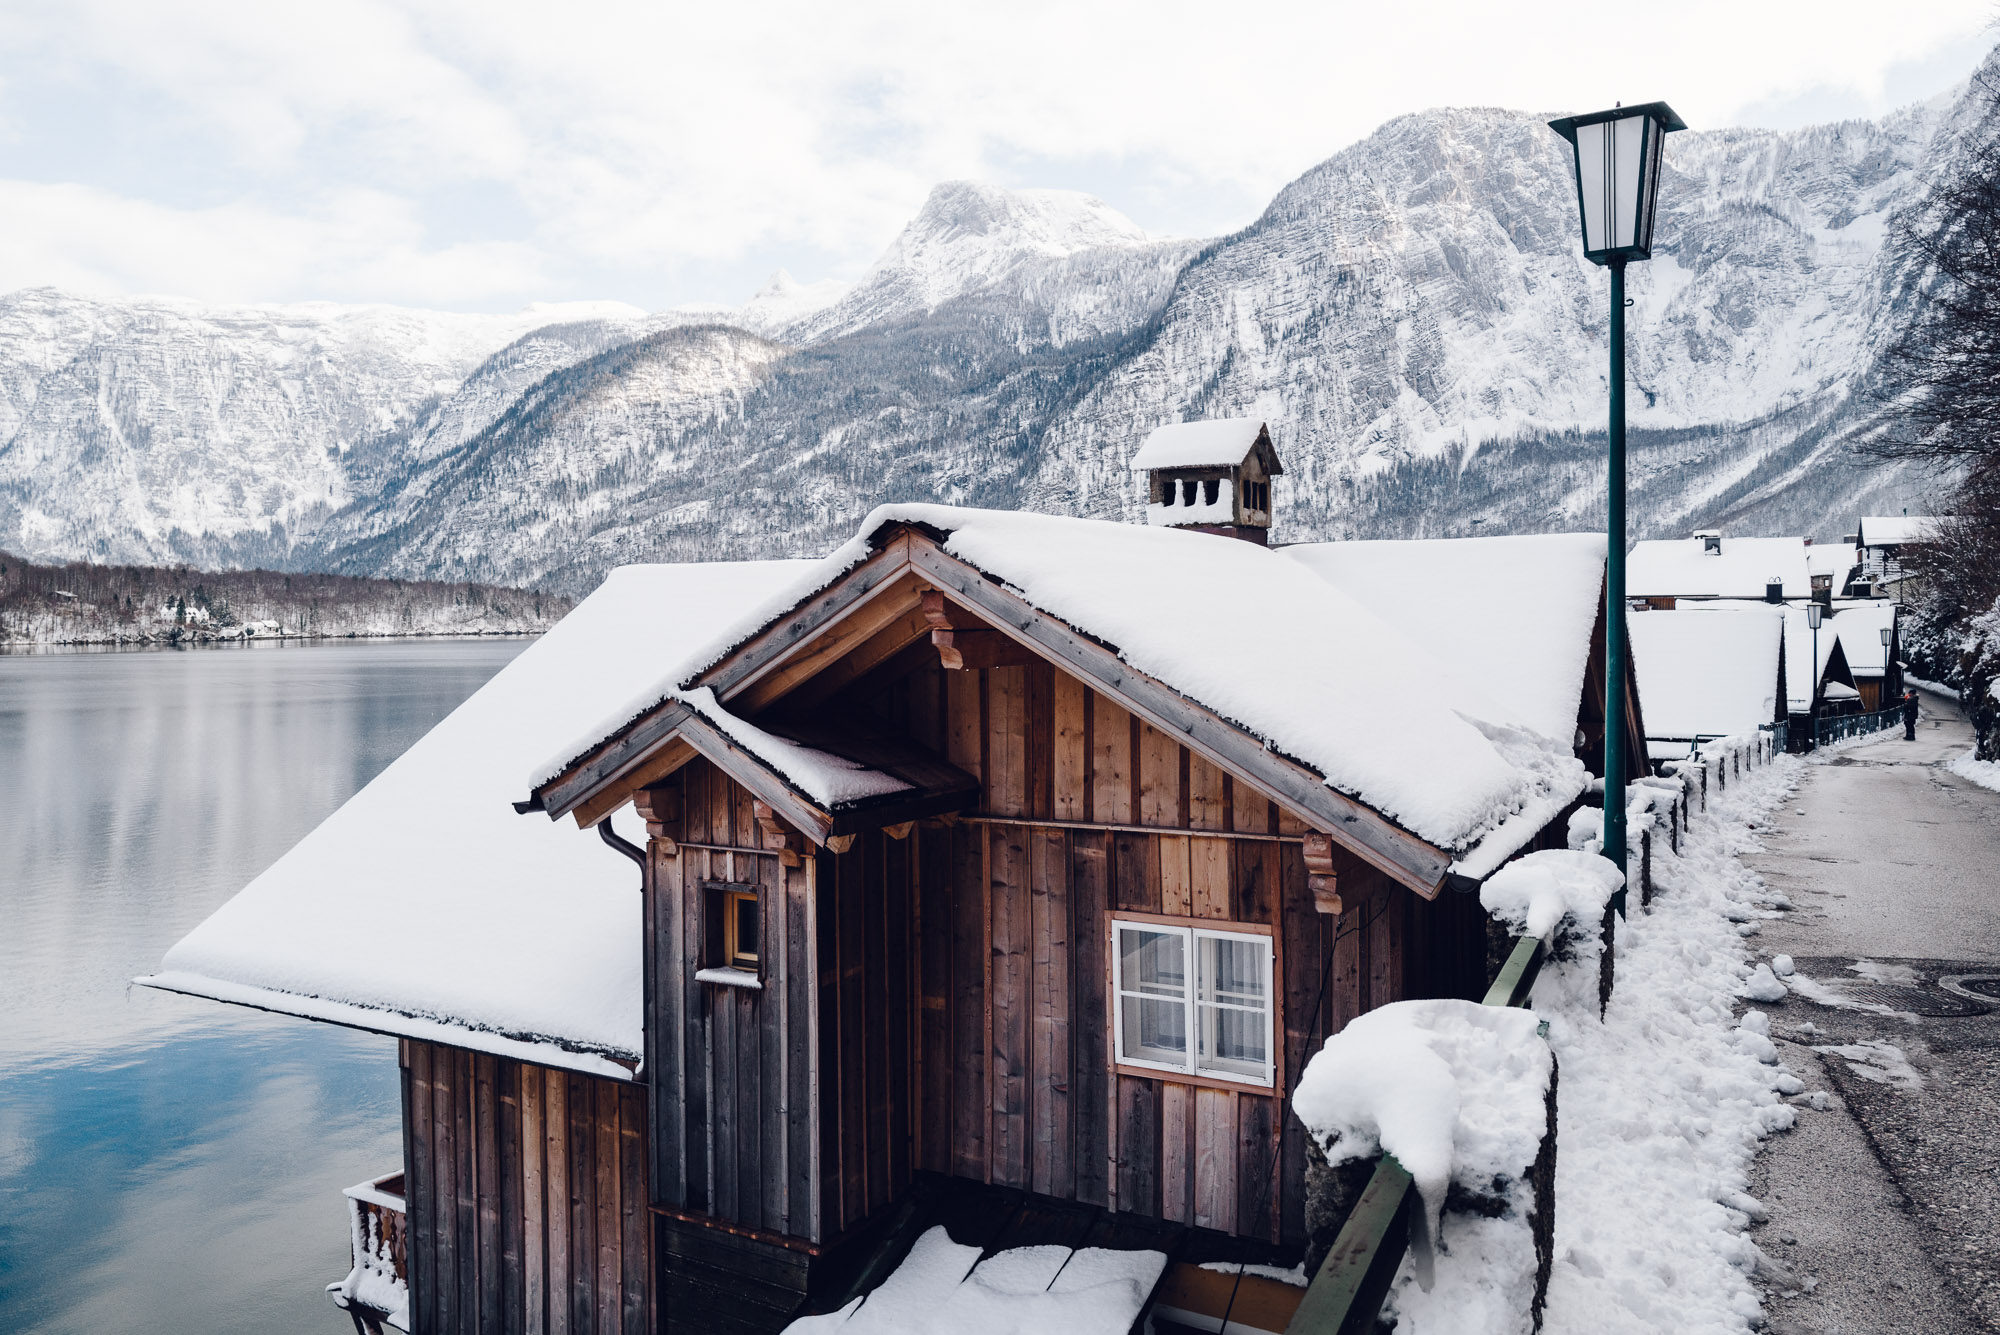 View of lake Hallstatt in winter from snow covered rooftops of houses